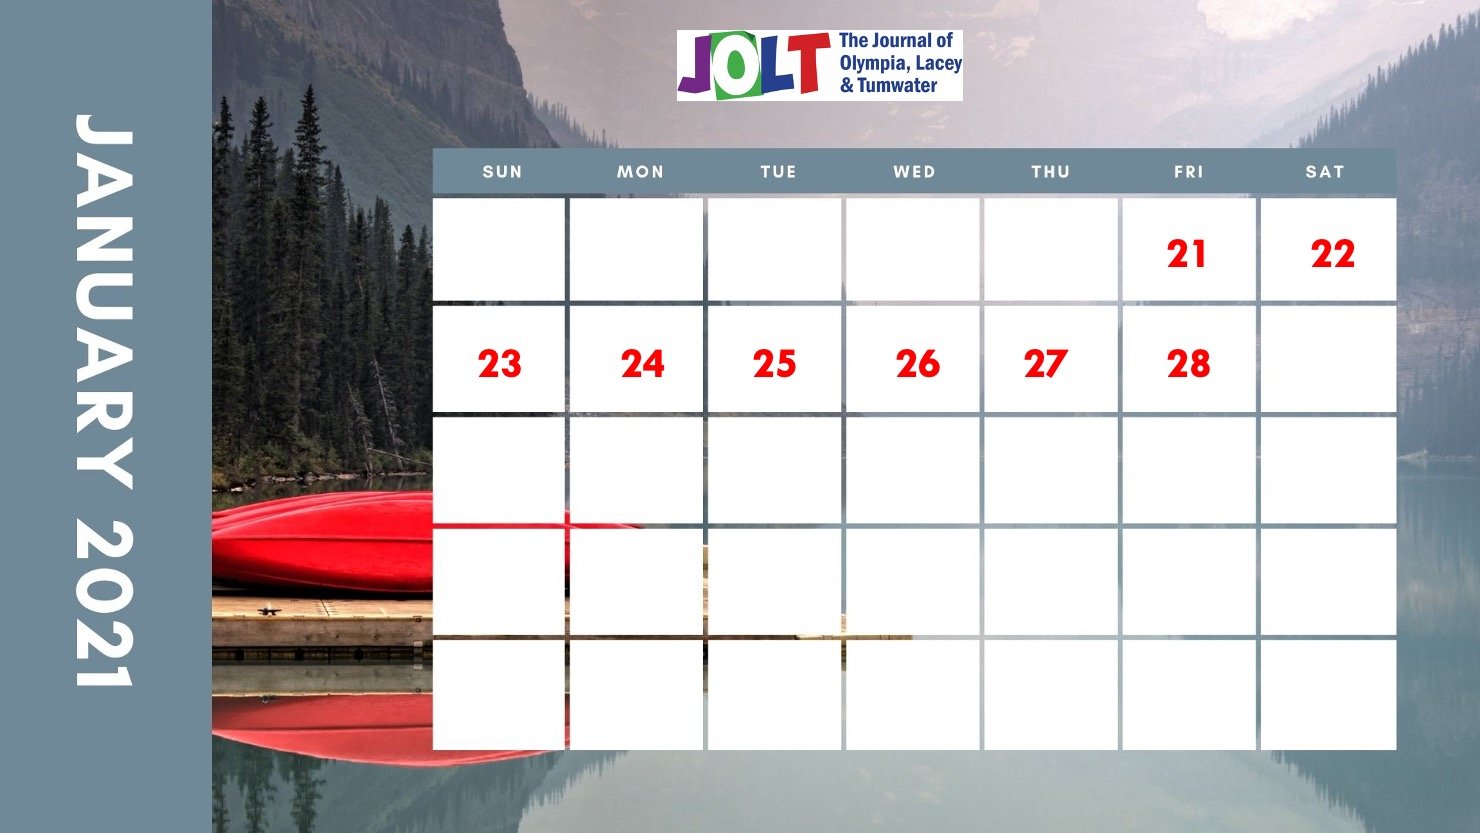 The JOLT Calendar Dates for upcoming week events